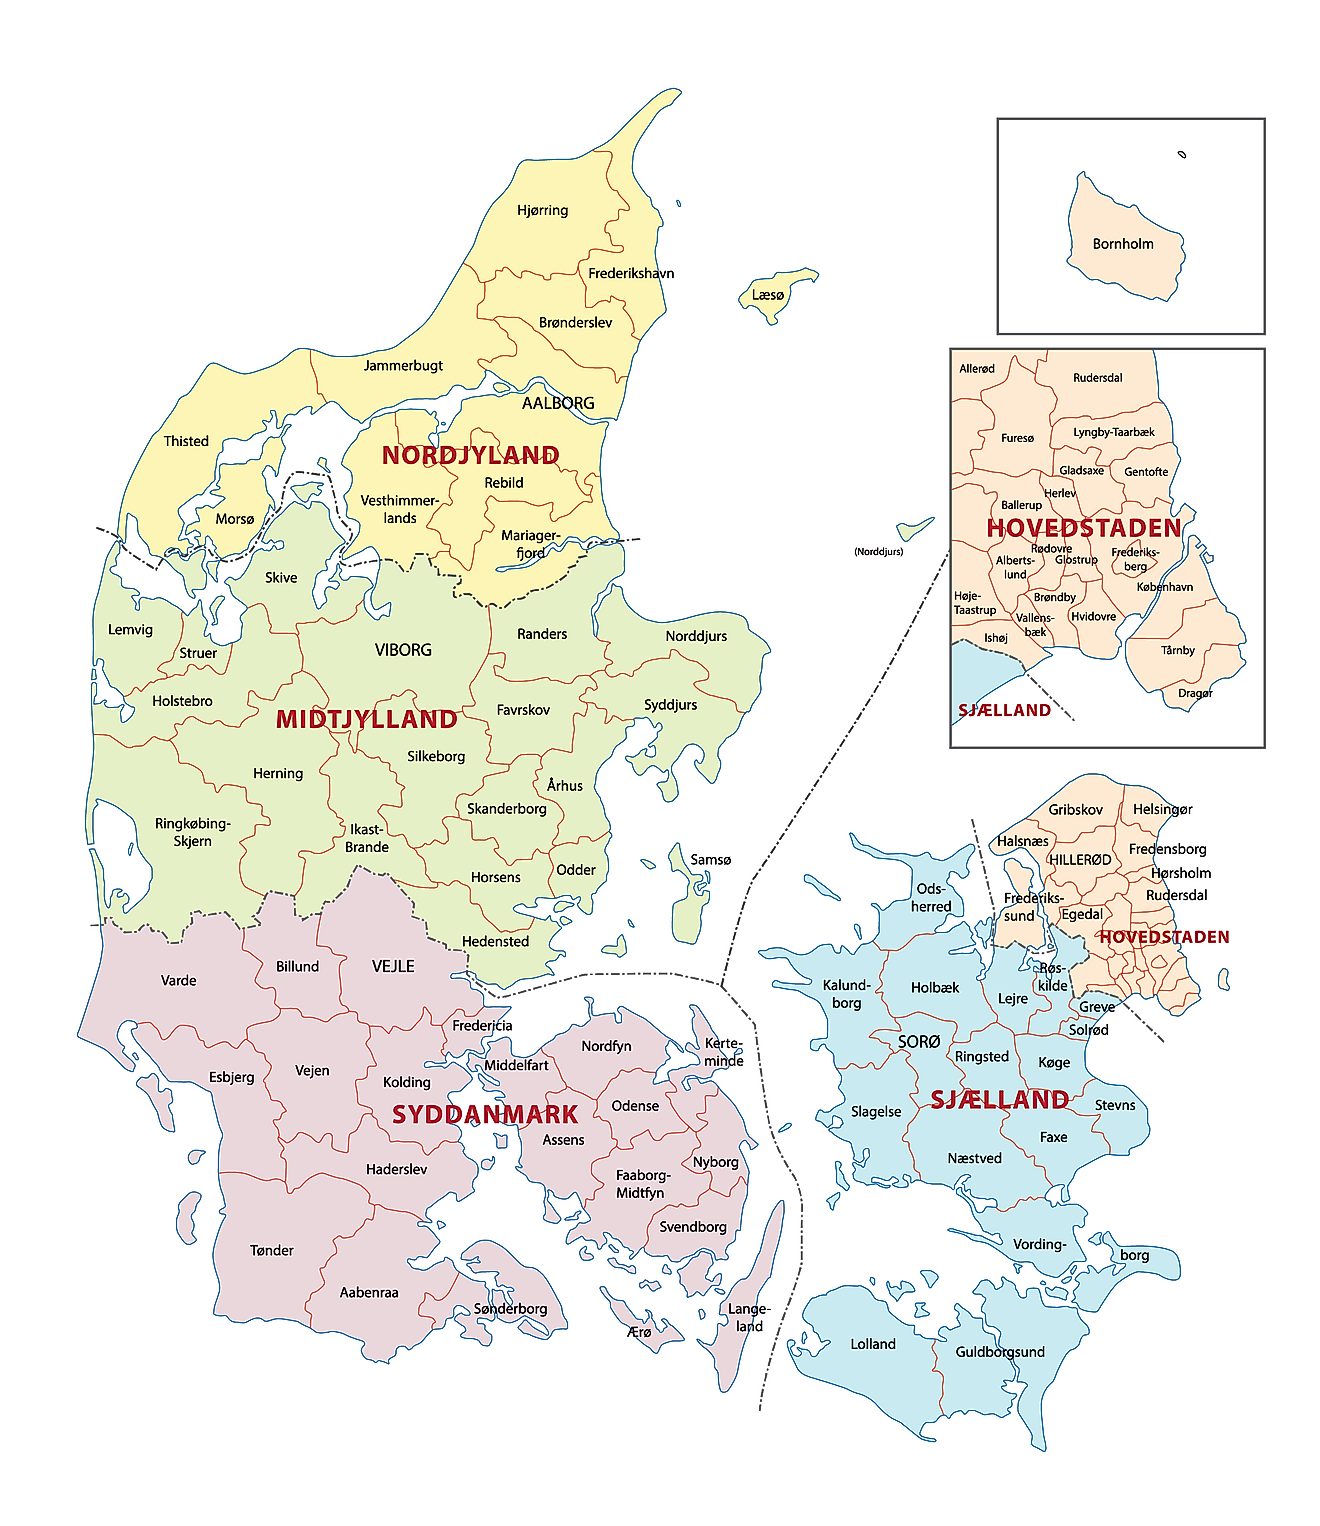 Political Map of Denmark showing its 5 regions and the capital city of Copenhagen